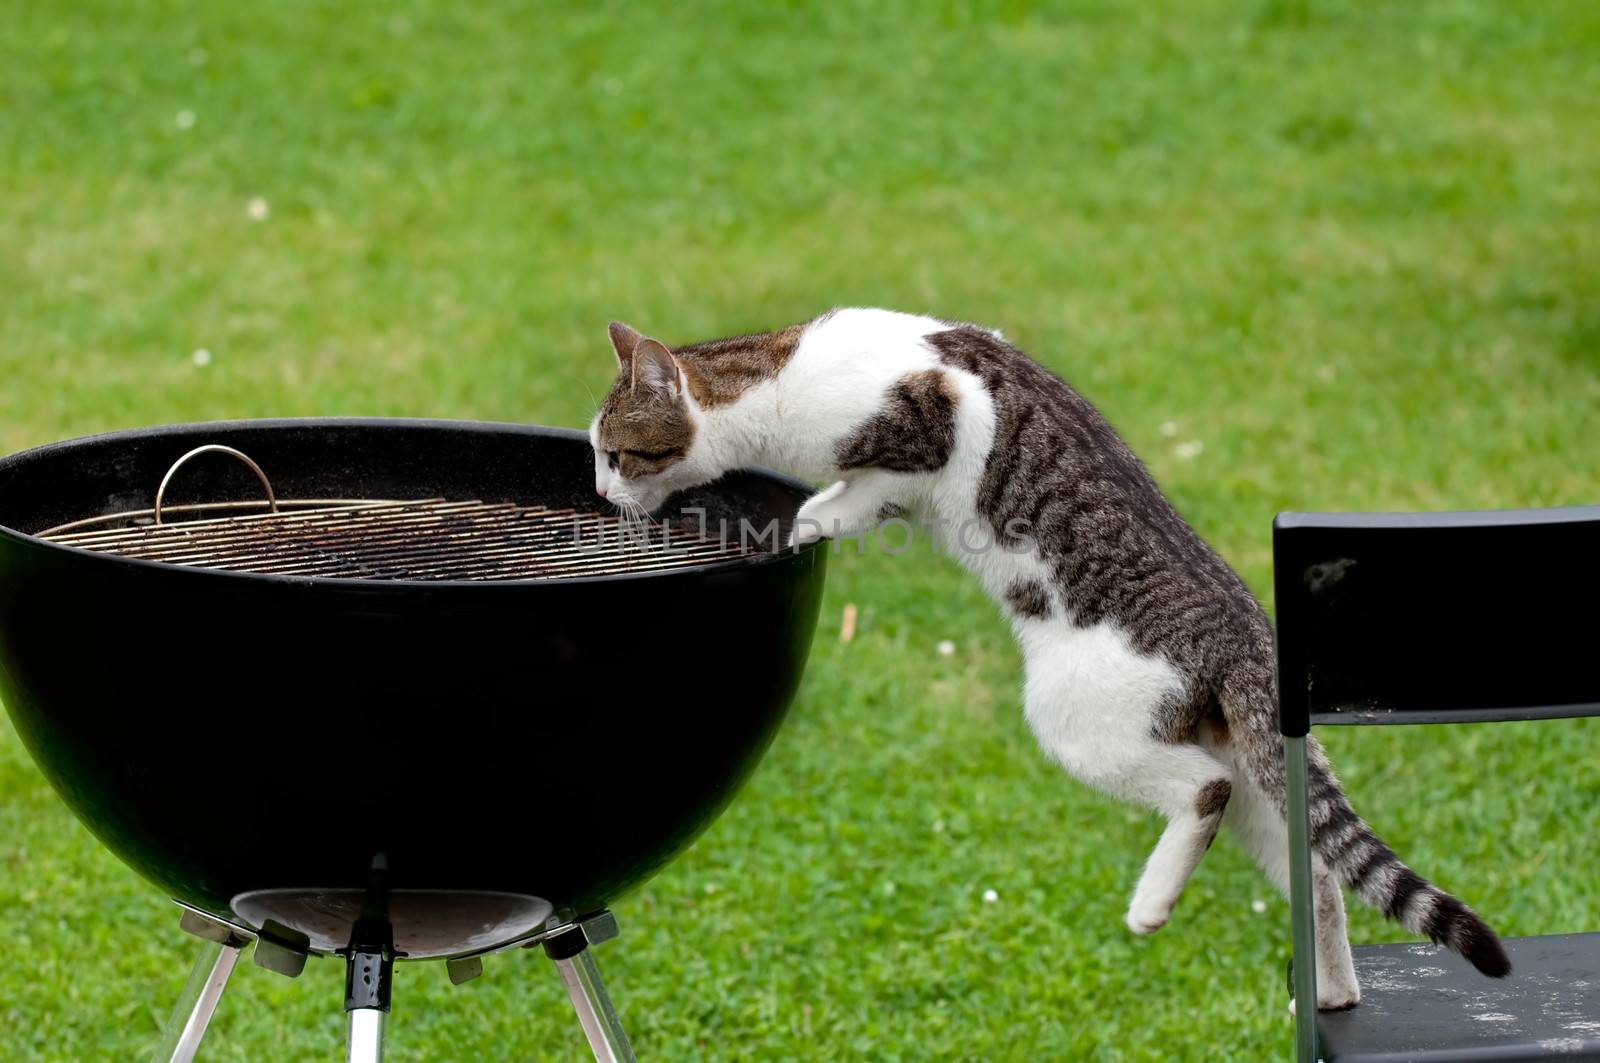 A hungry cat standing on chair reaching a grill